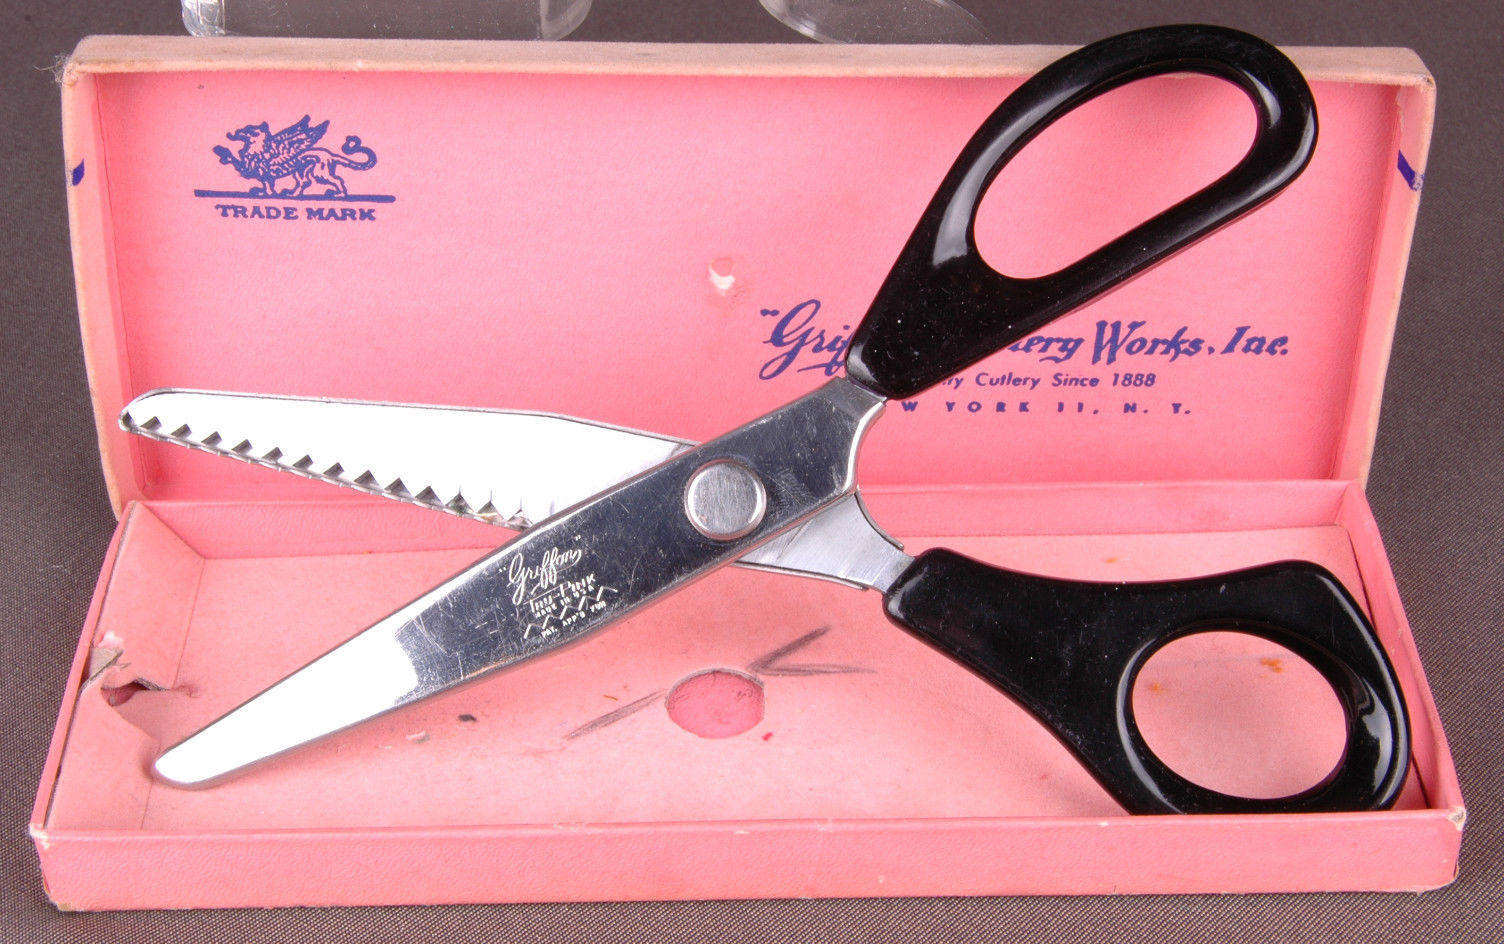 Primary image for Vintage Sewing Griffon Scissors Pinking Shears Tru-Pink USA Box Instructions-N.Y